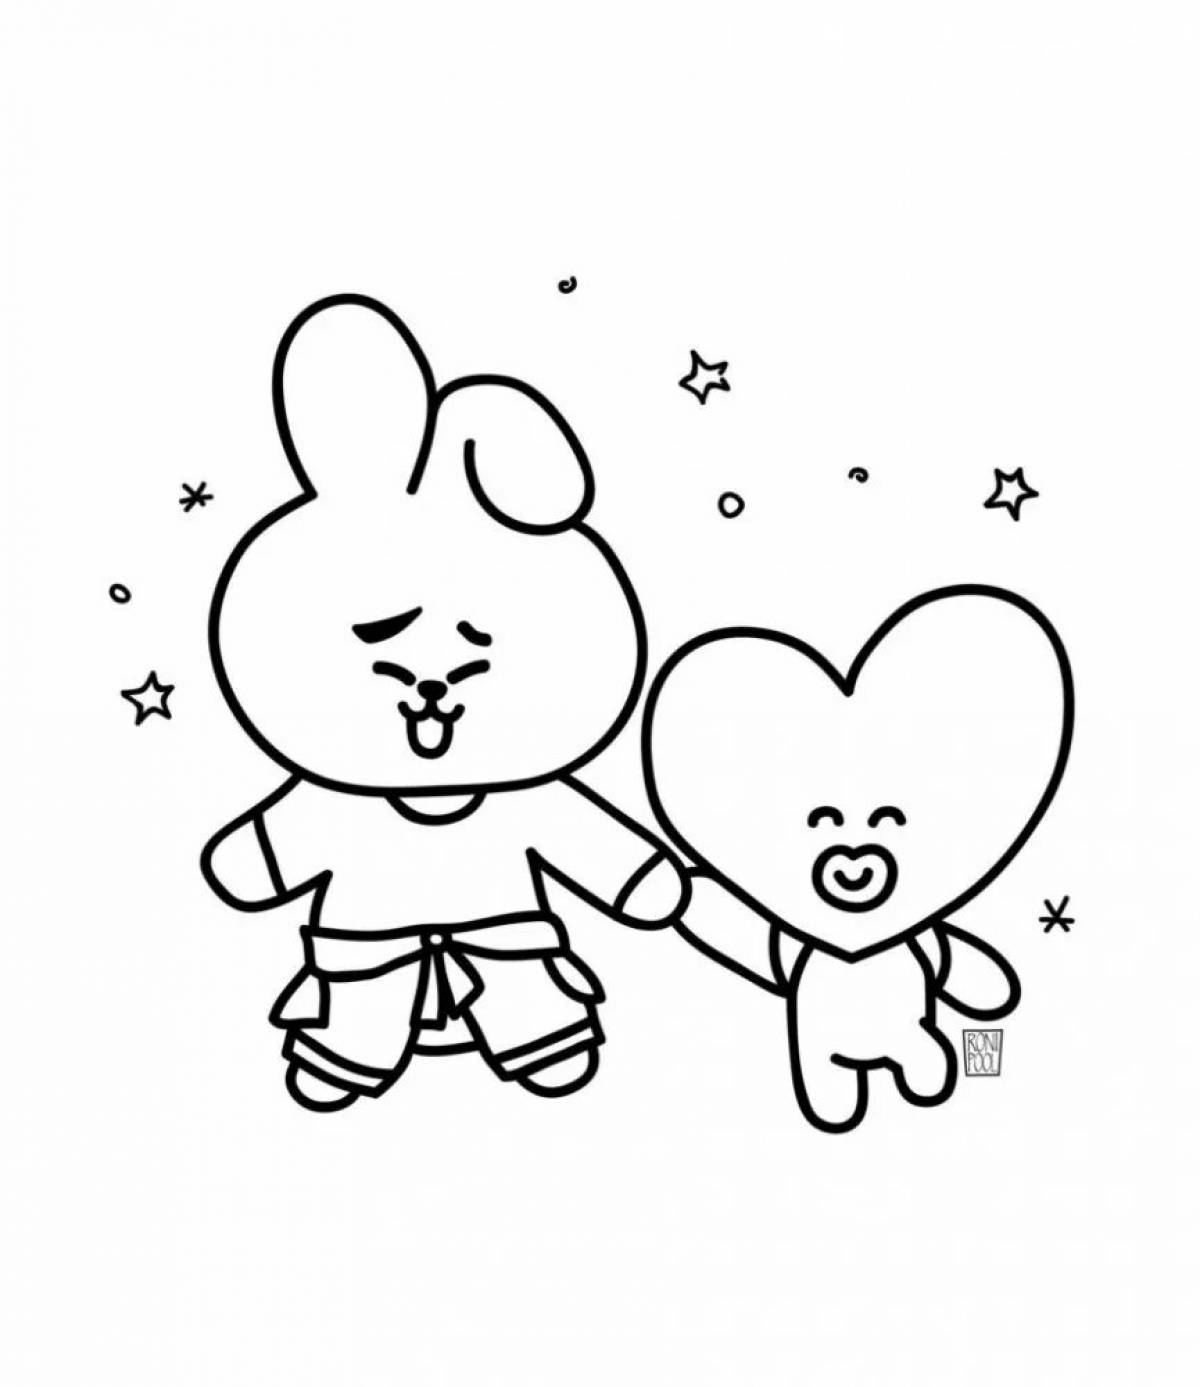 Bt21 amazing cookie coloring page